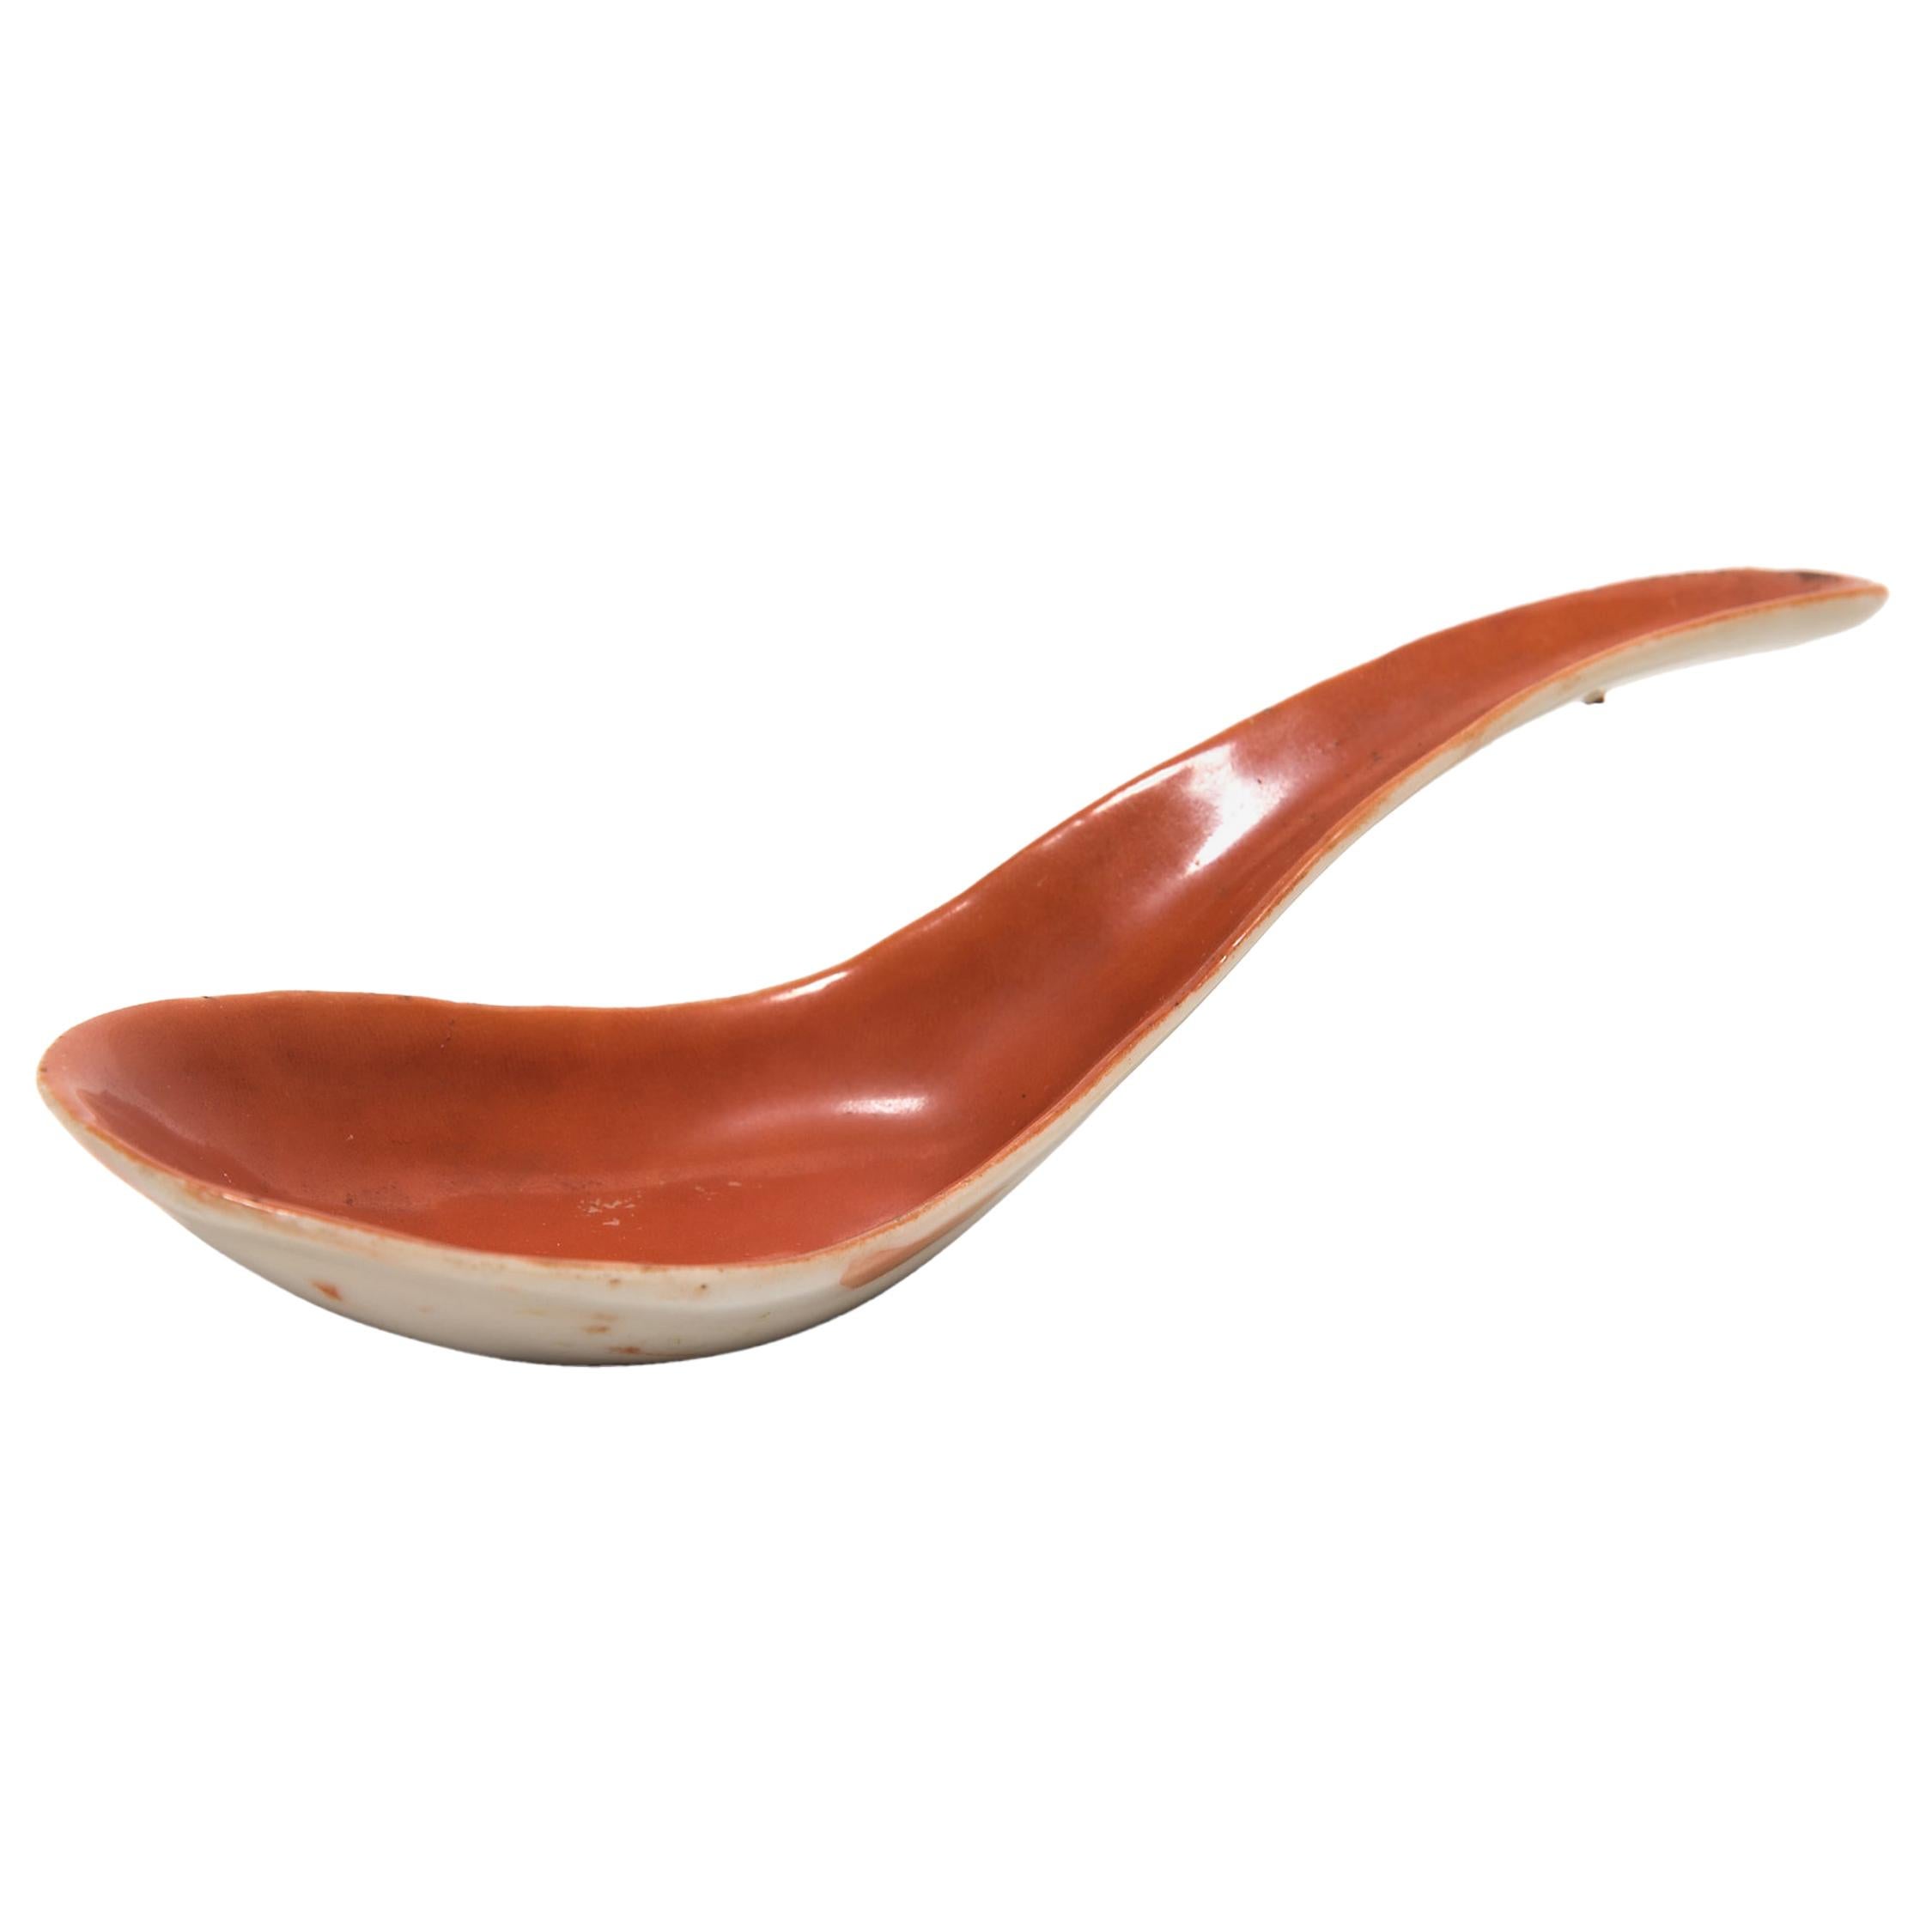 Chinese Red Soup Spoon, c. 1850